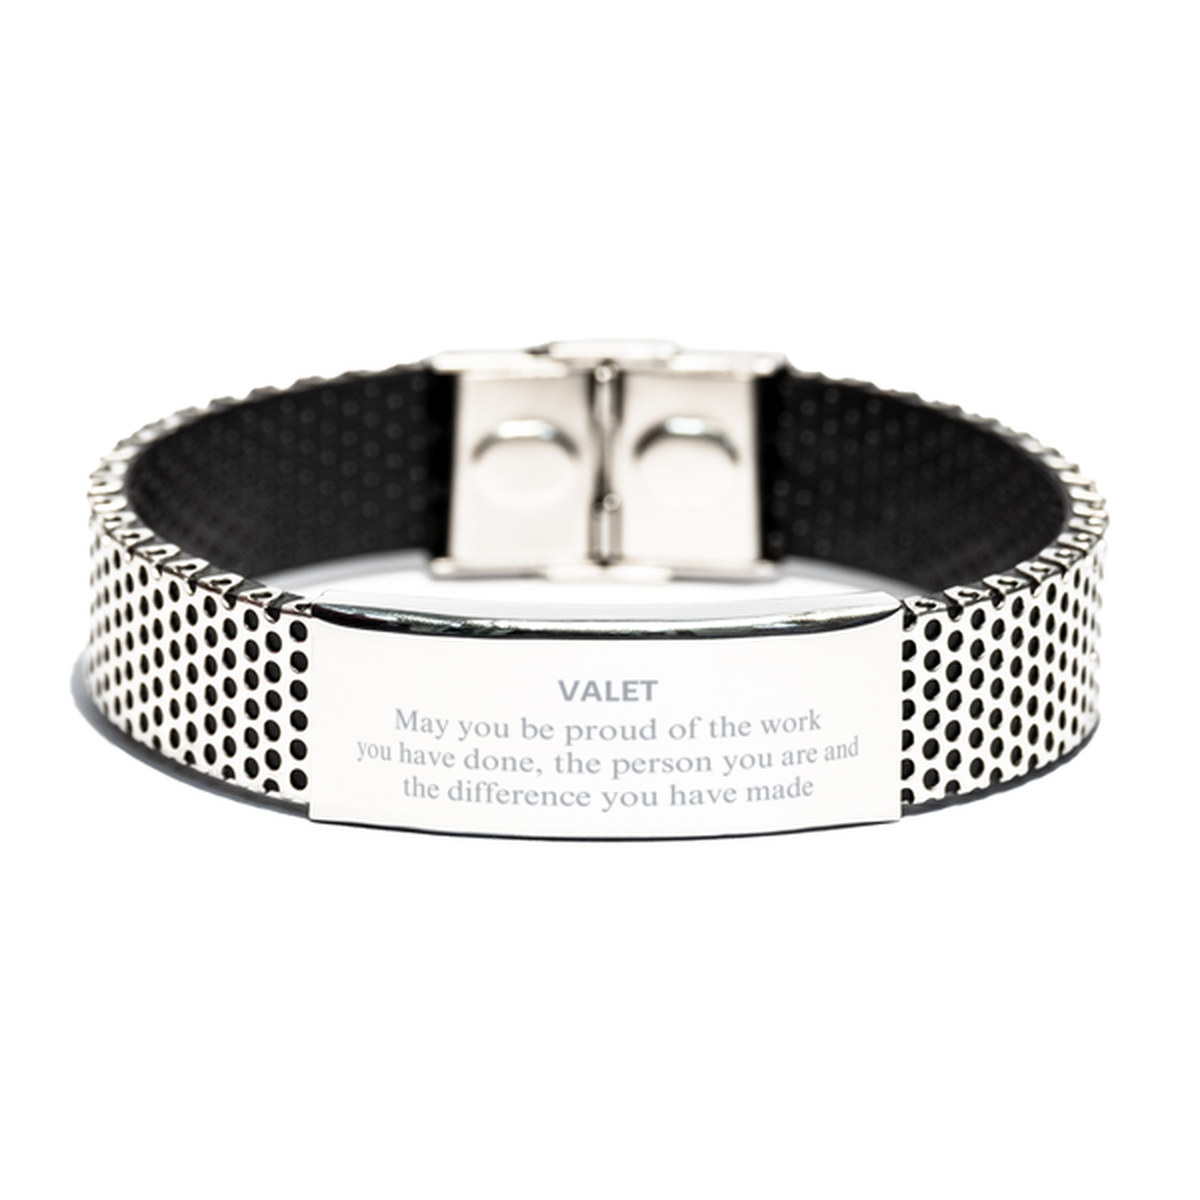 Valet May you be proud of the work you have done, Retirement Valet Stainless Steel Bracelet for Colleague Appreciation Gifts Amazing for Valet